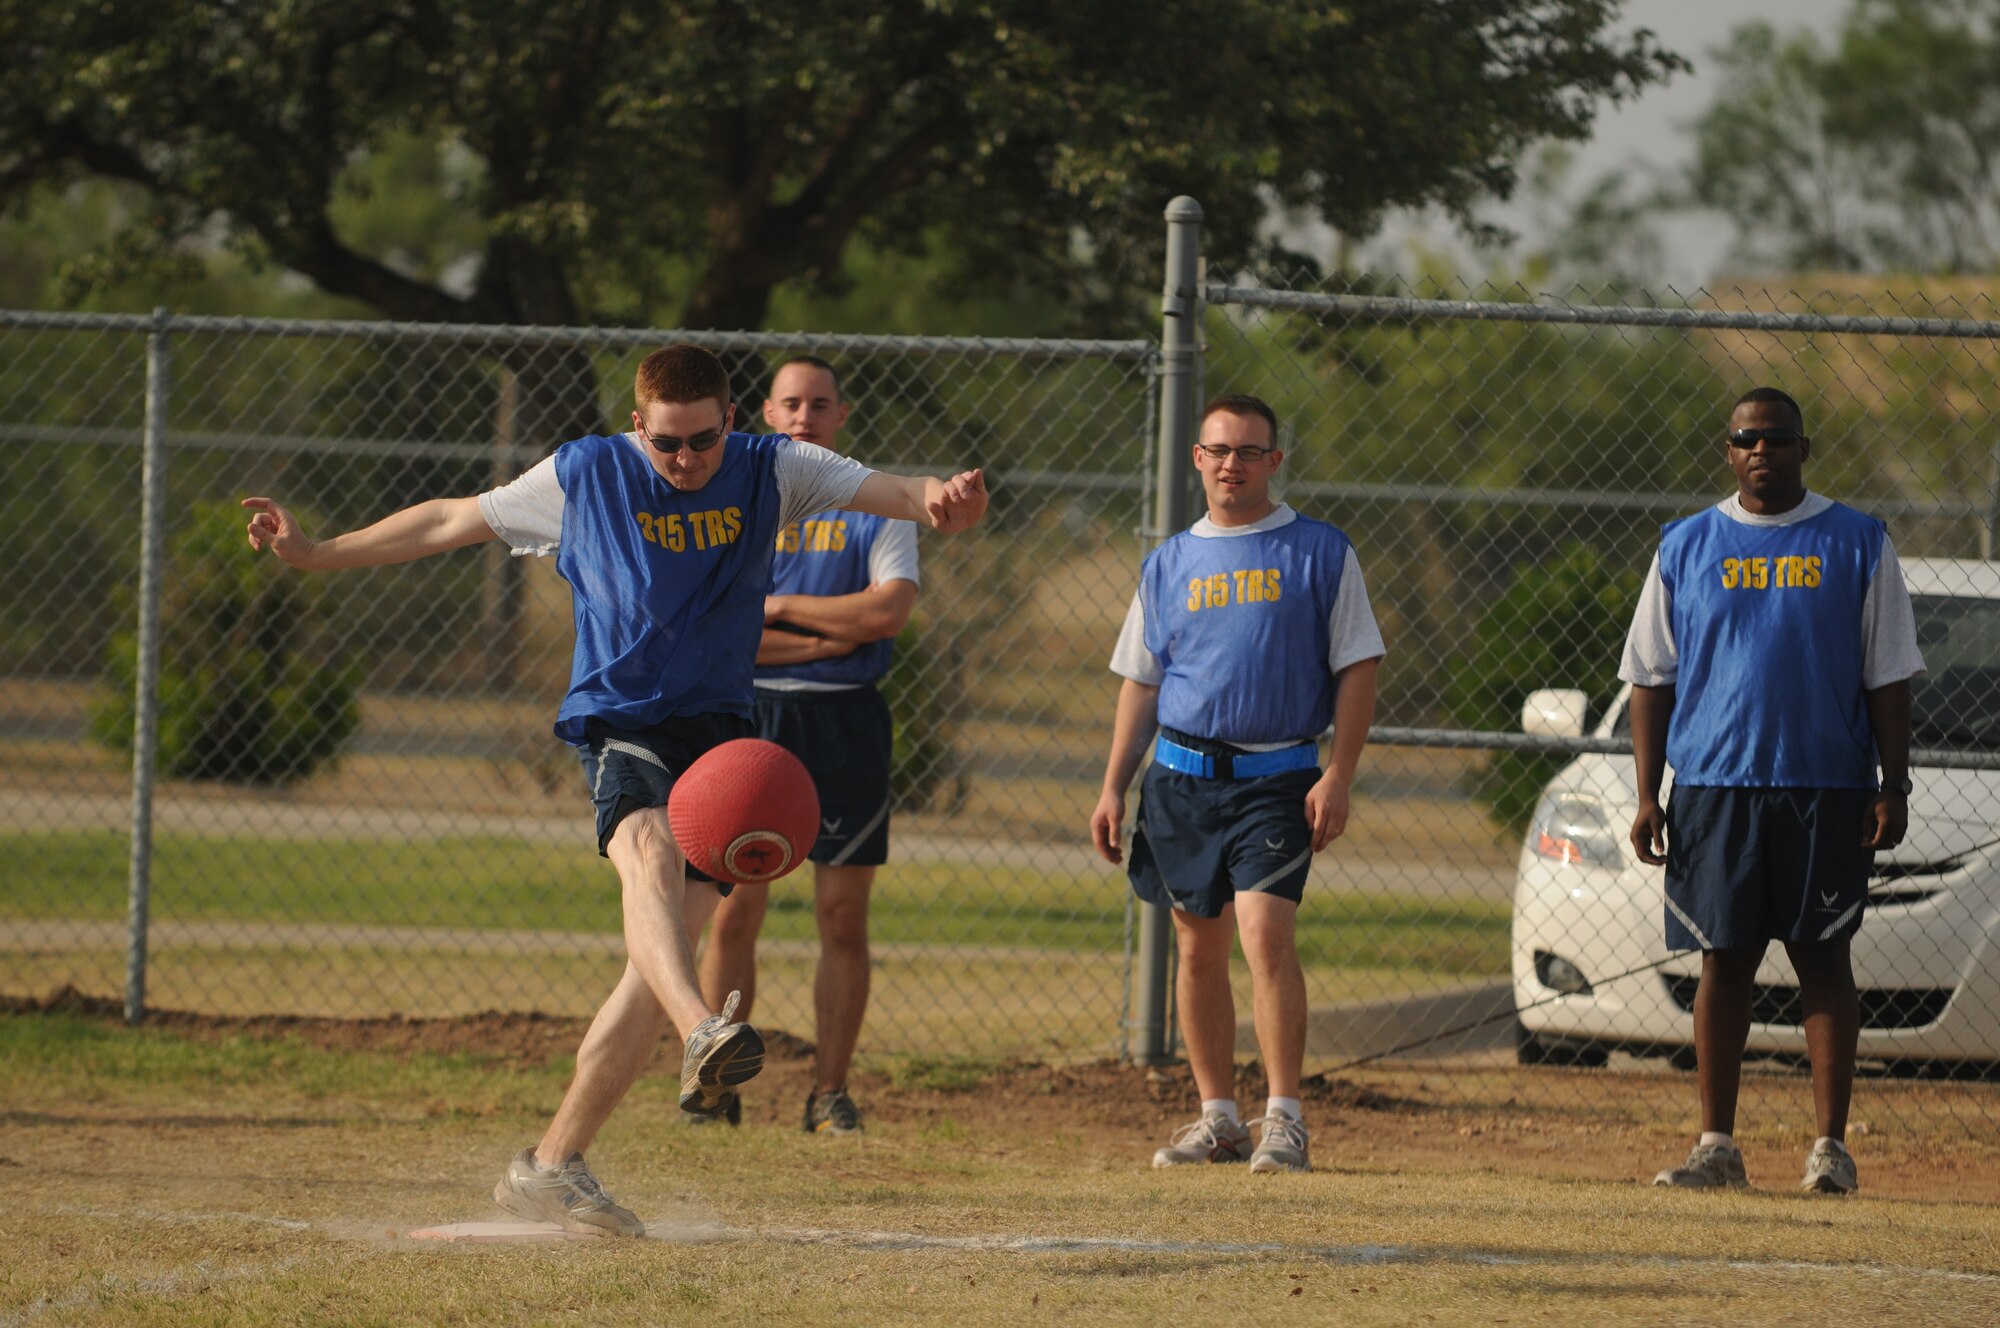 GOODFELLOW AIR FORCE BASE, Texas - Airmen from the 315th Training Squadron participate in a kickball game May 27. Team Goodfellow devoted the day to safety and sports to kick off the 101 critical days of summer. (U.S. Air Force photo/Staff Sgt. Heather L Rodgers)